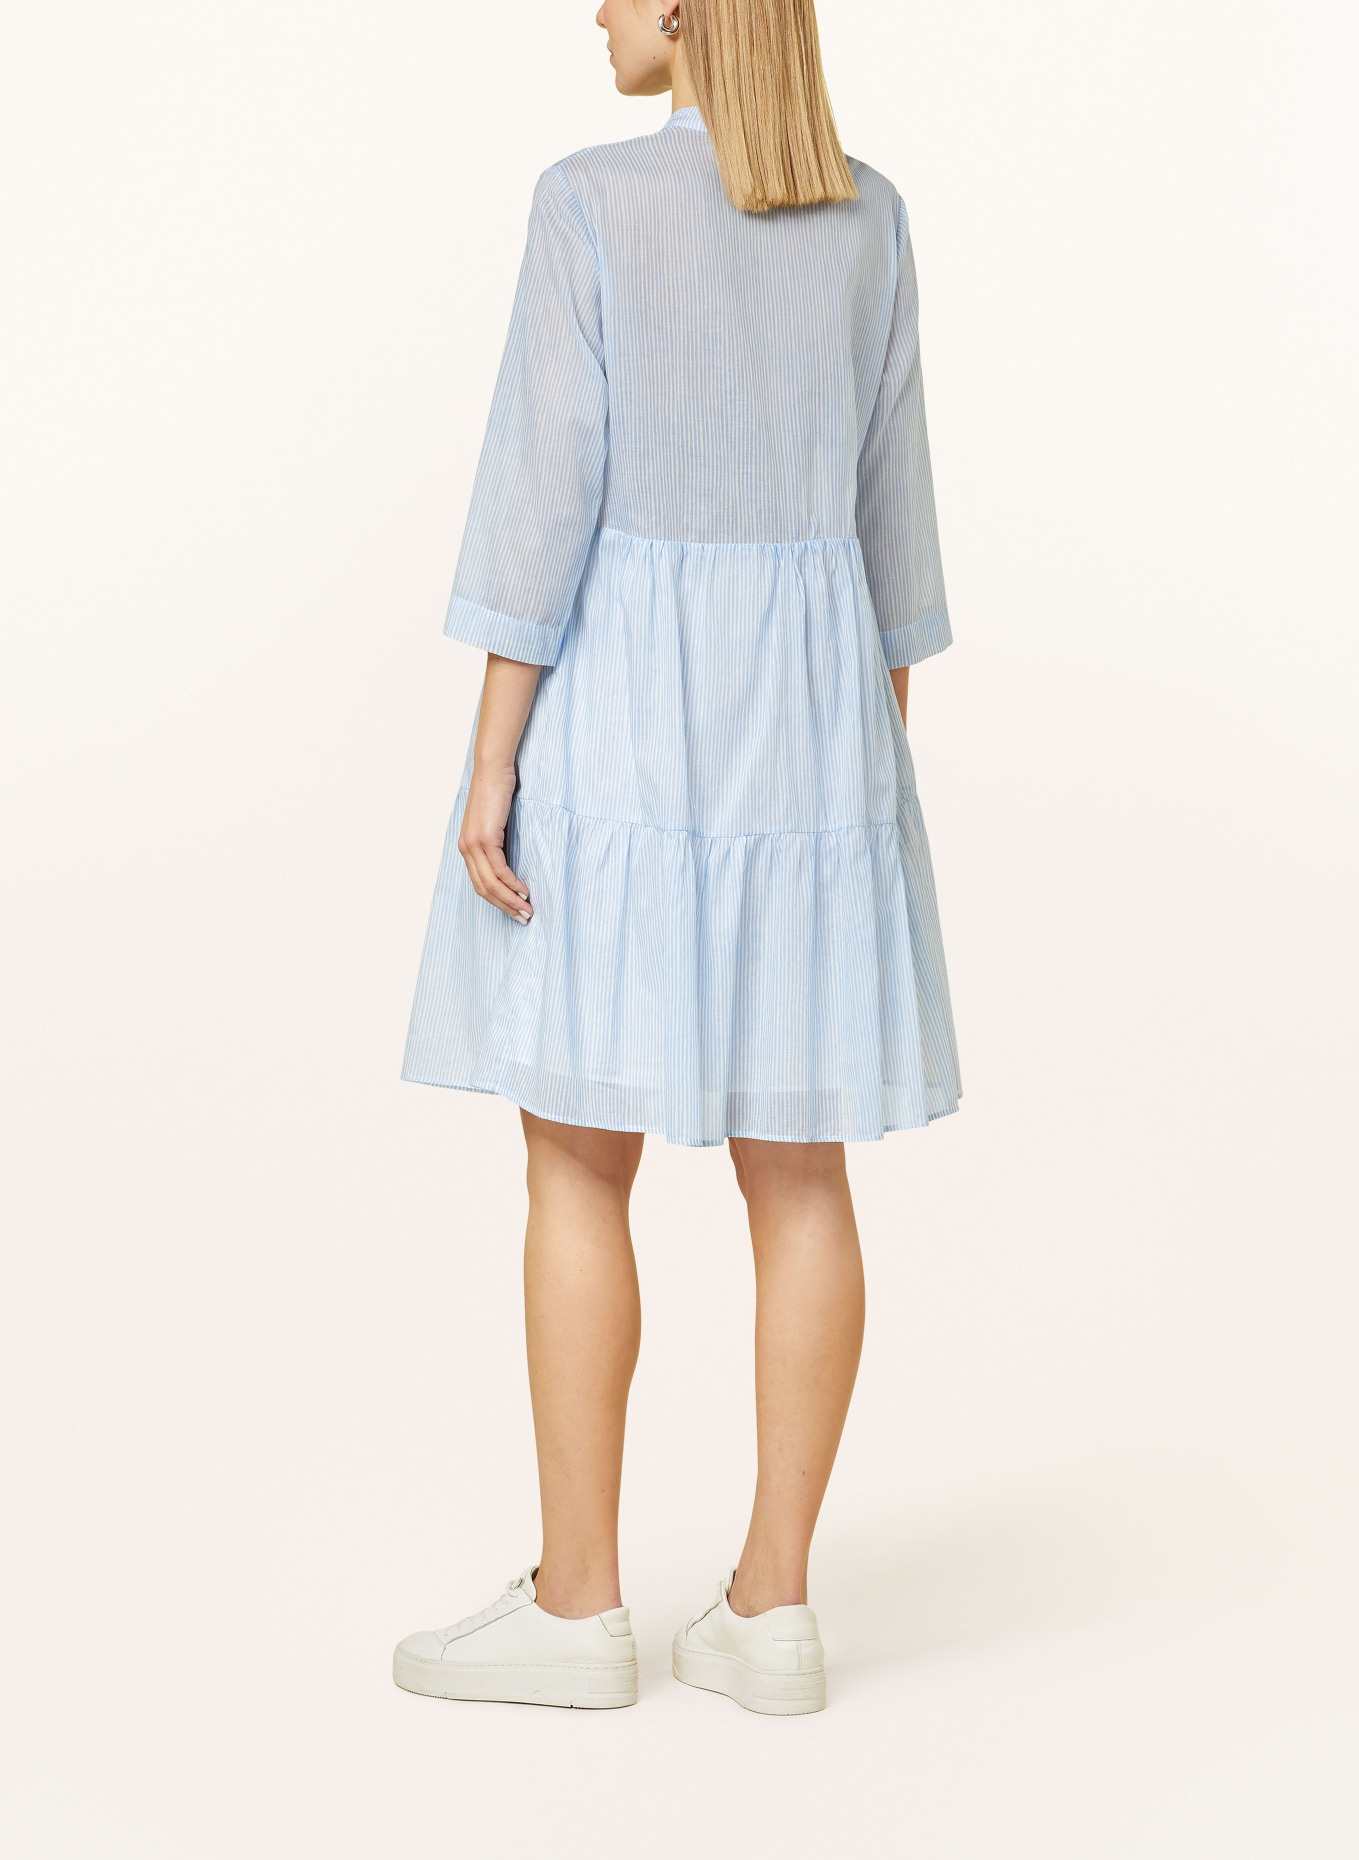 ELENA MIRO Dress with 3/4 sleeves, Color: LIGHT BLUE/ WHITE (Image 3)